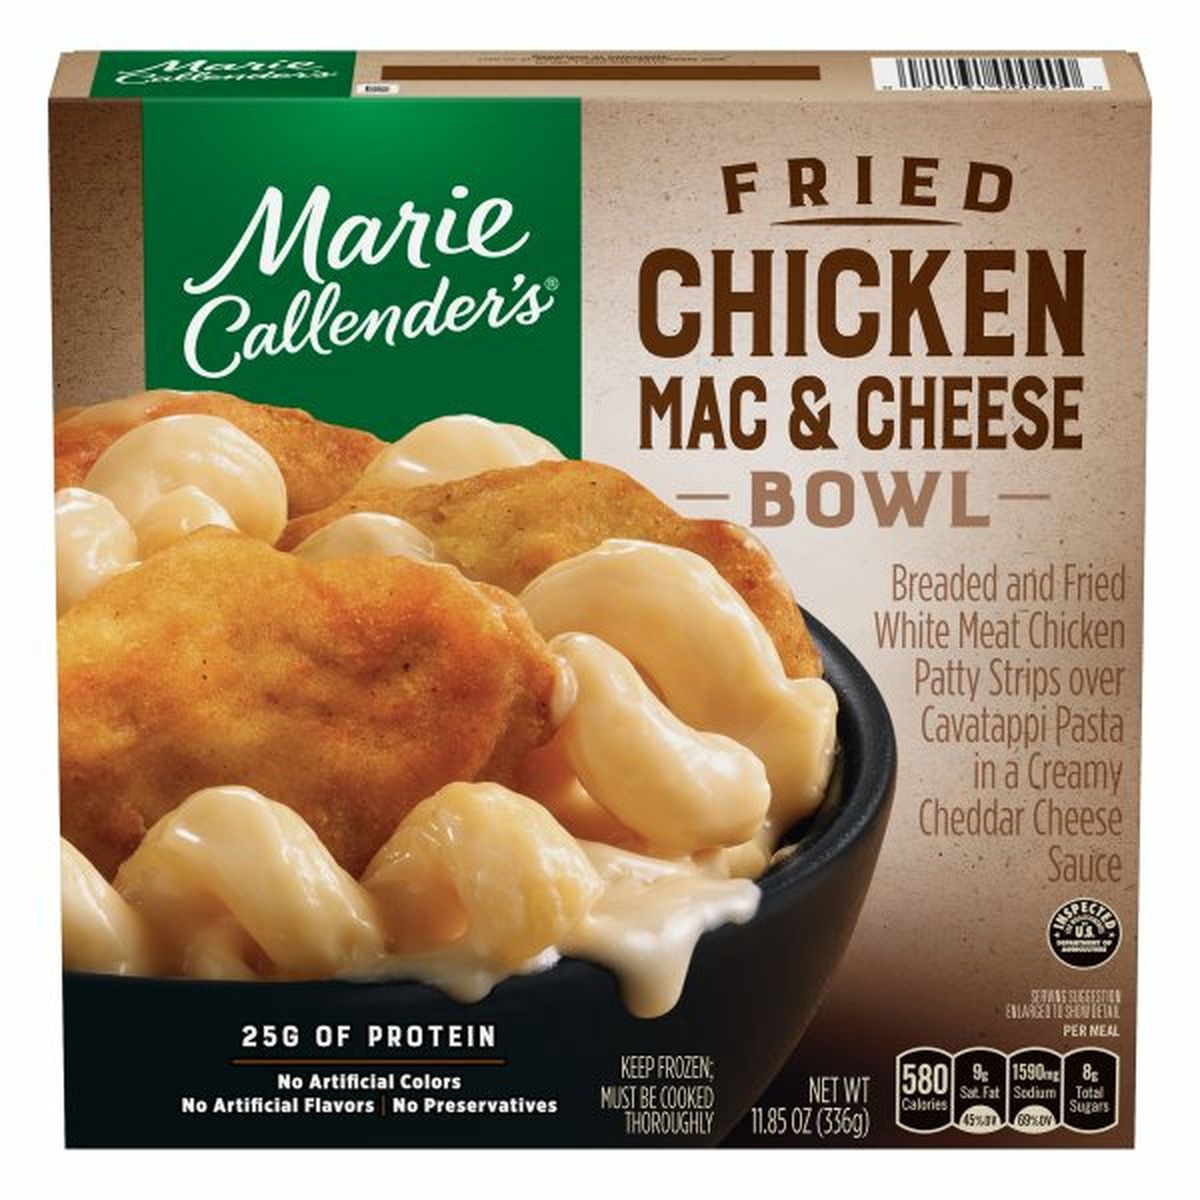 Calories in Marie Callender's Mac & Cheese Bowl, Fried Chicken